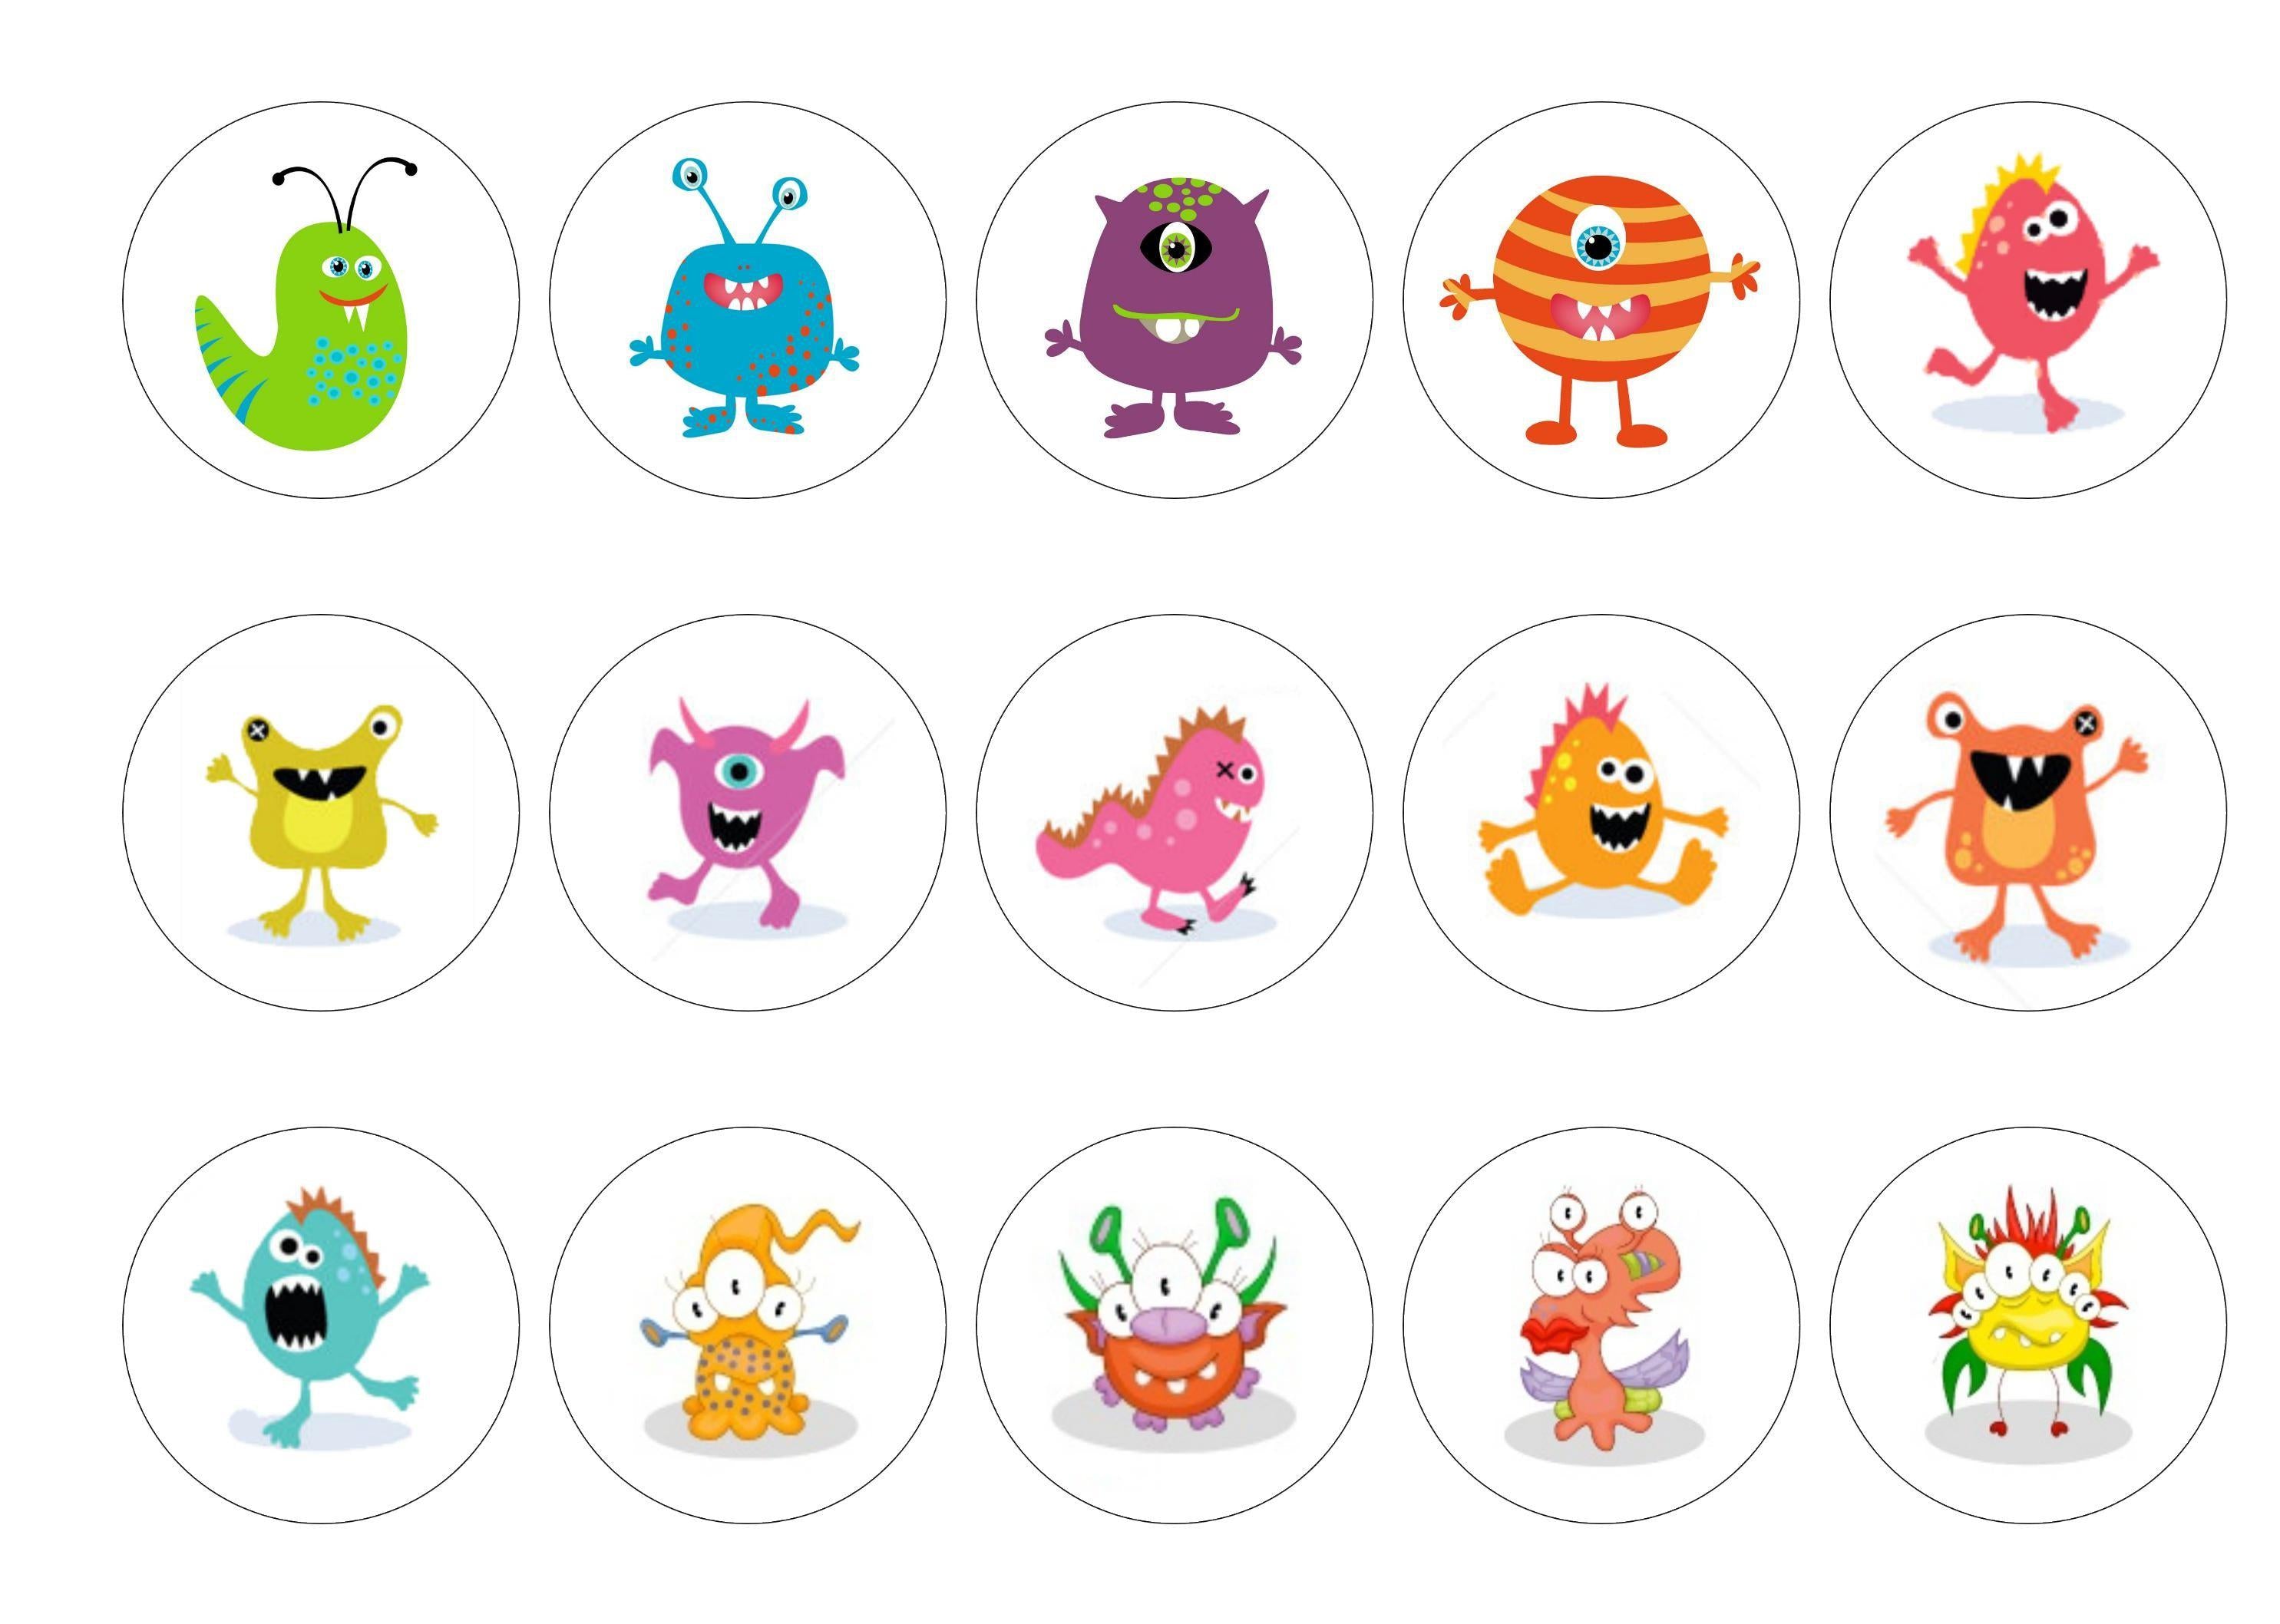 Printed edible cupcake toppers with party monsters